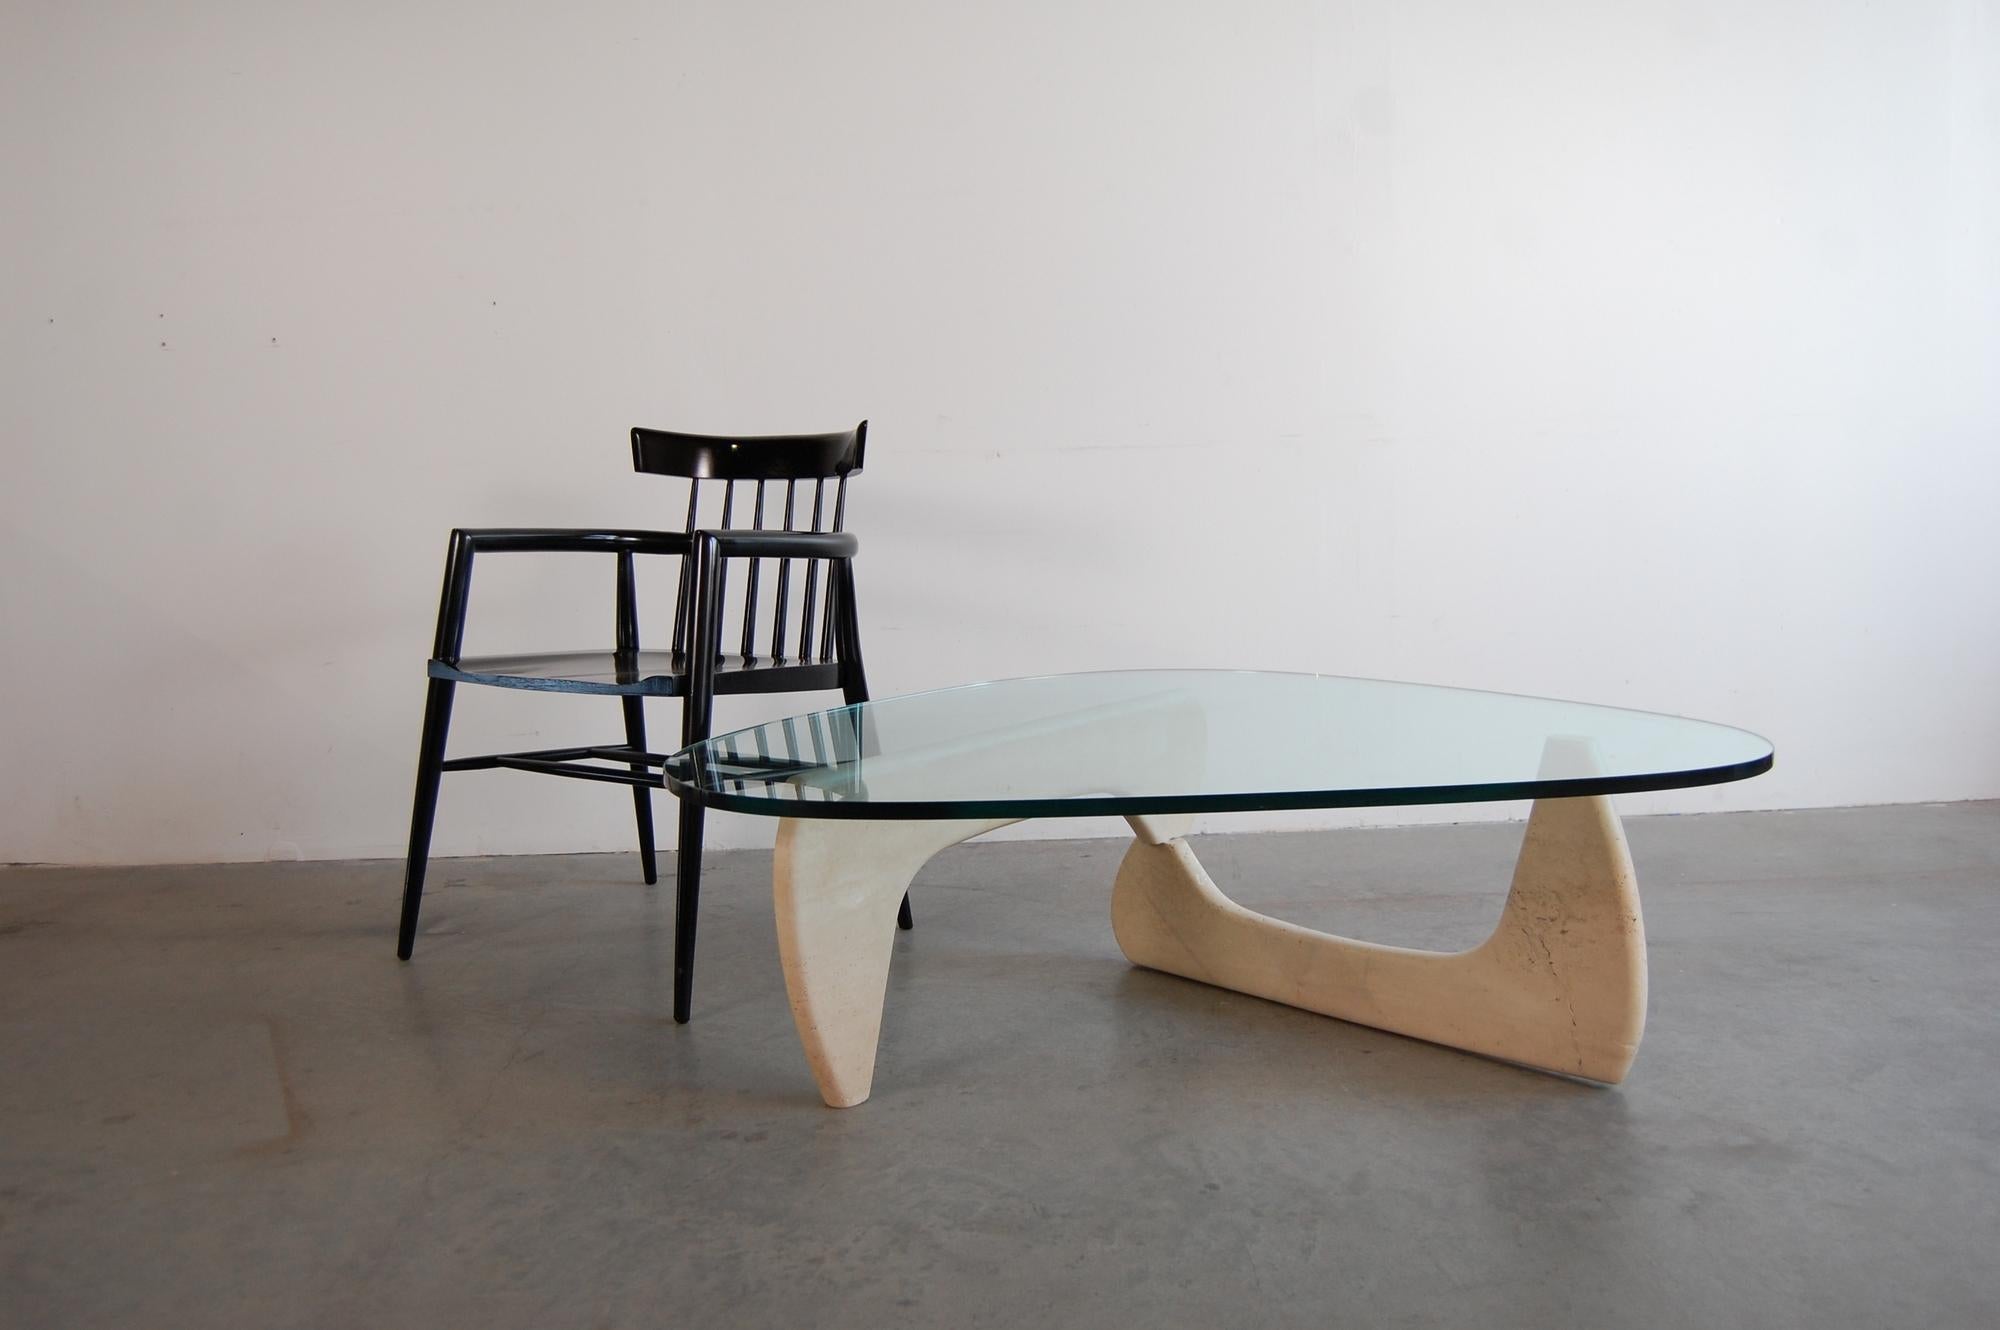 IN-50 style coffee table, in the style of Isamu Noguchi, circa 1948. This particular tables base is in travertine marble, which is seldom seen, and was most likely produced in the late 1960s or early 1970s. Measures: 49